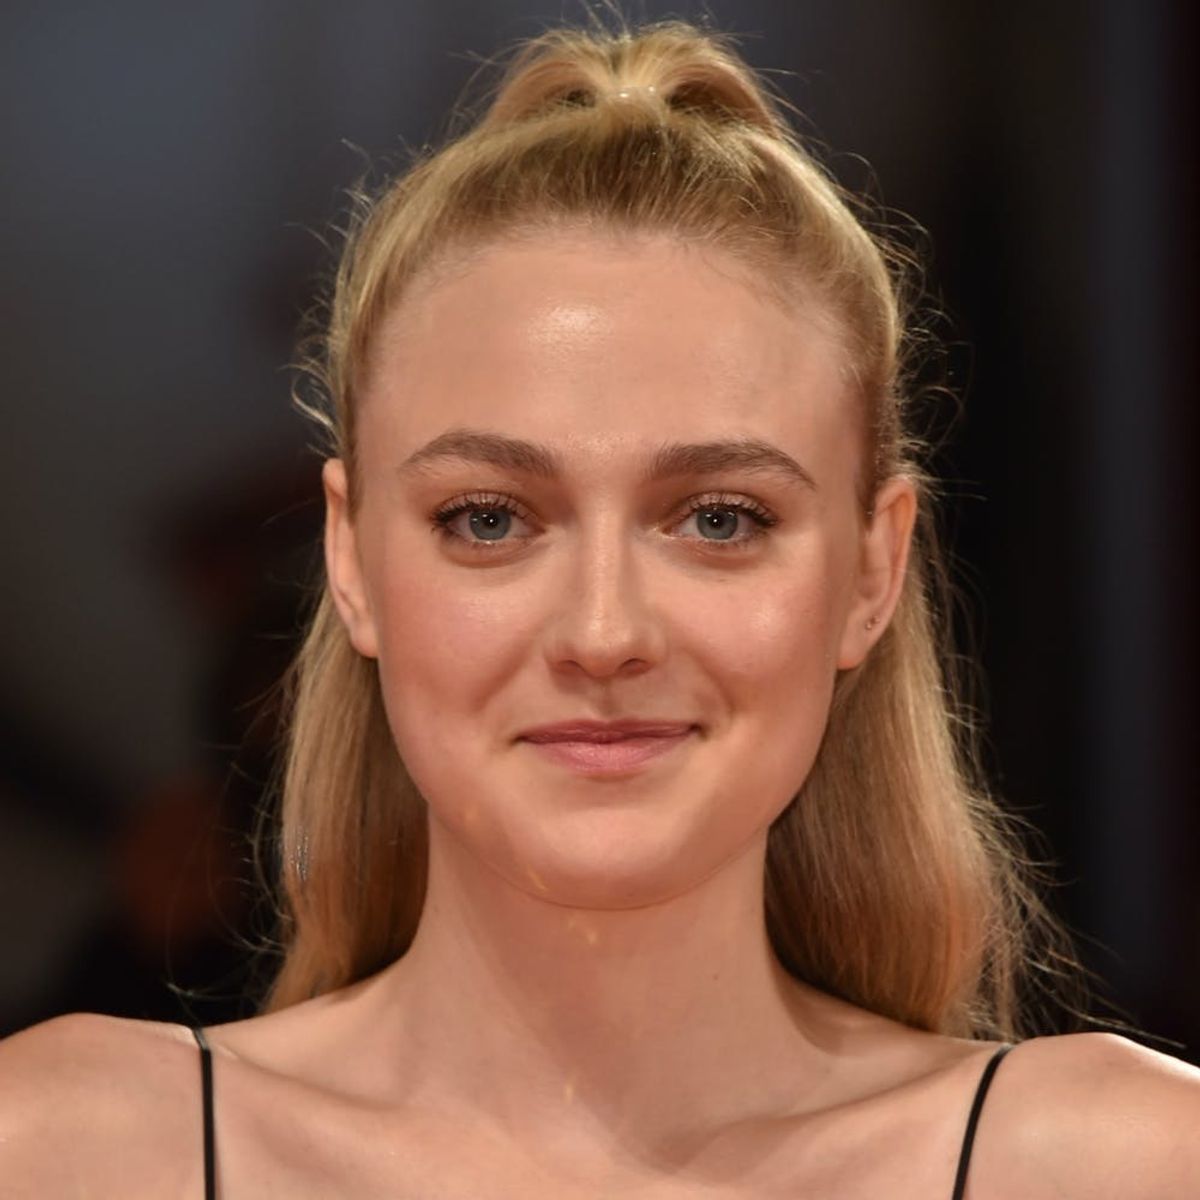 Dakota Fanning Just Slayed the Venice Film Fest Carpet in a Dress That Was Fit for a Mermaid